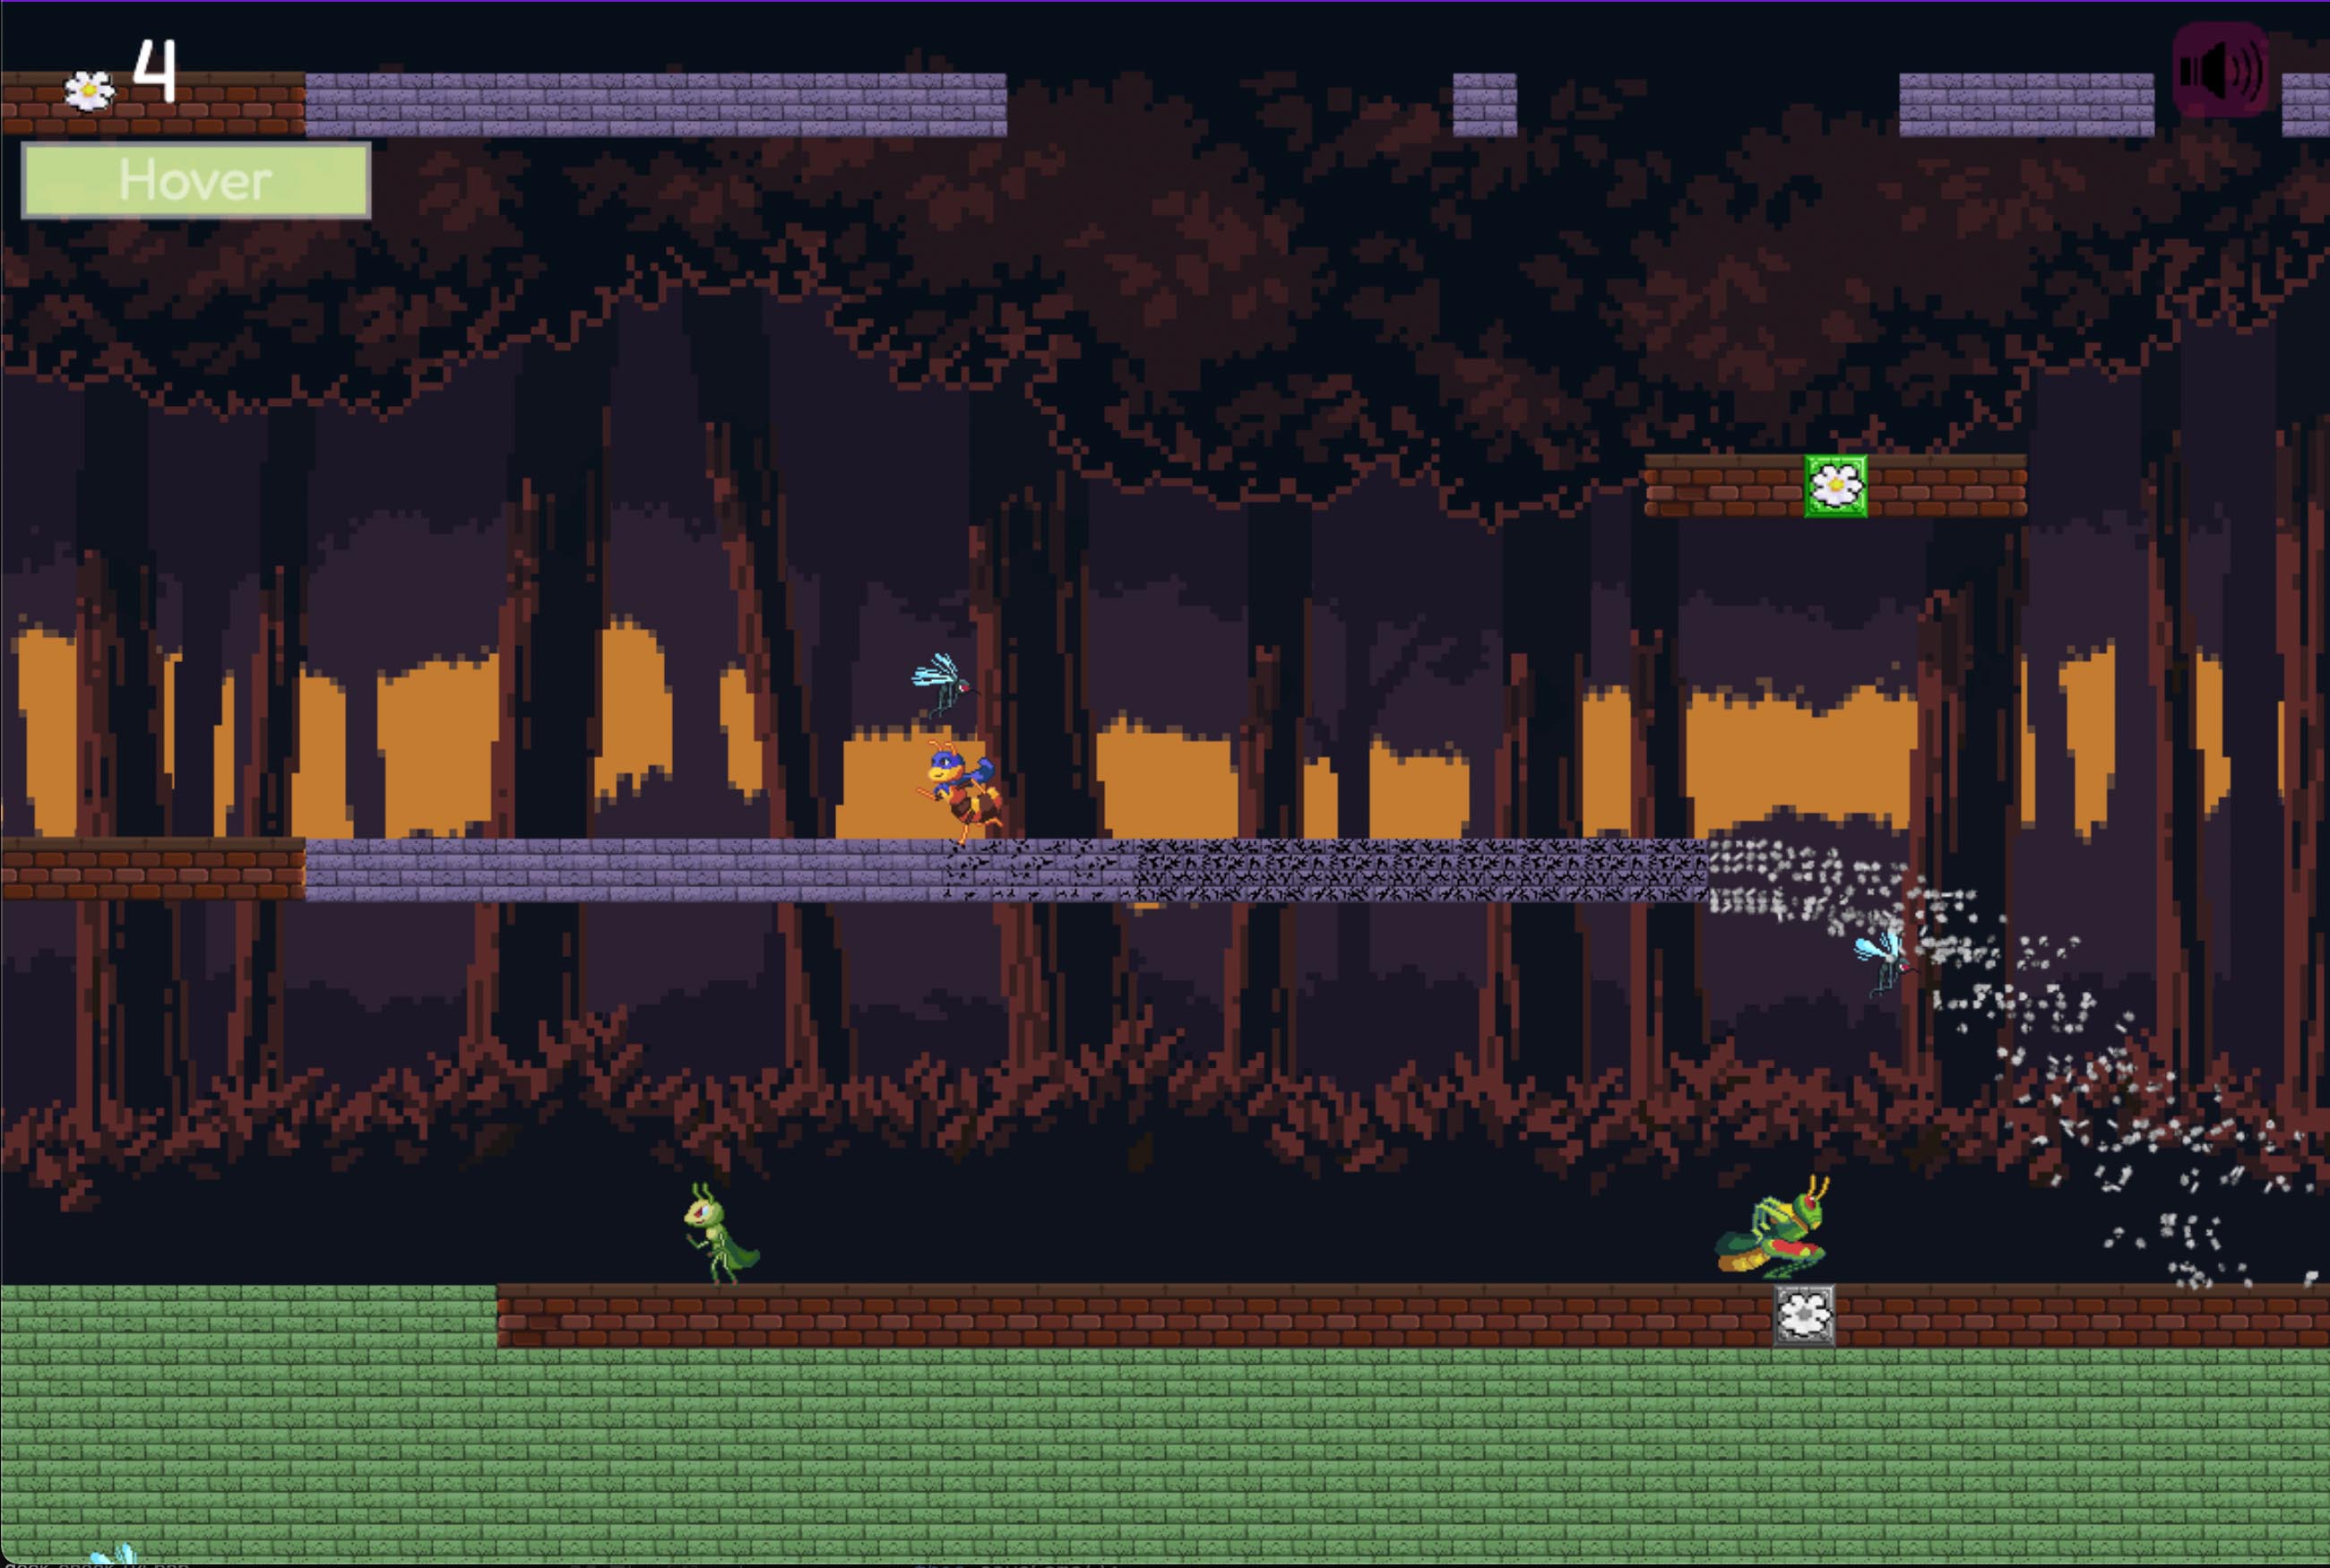 This is a screenshot from Homophone Bee. The player is running across crumbling bricks through a dark forest and surrounded by enemy insects.